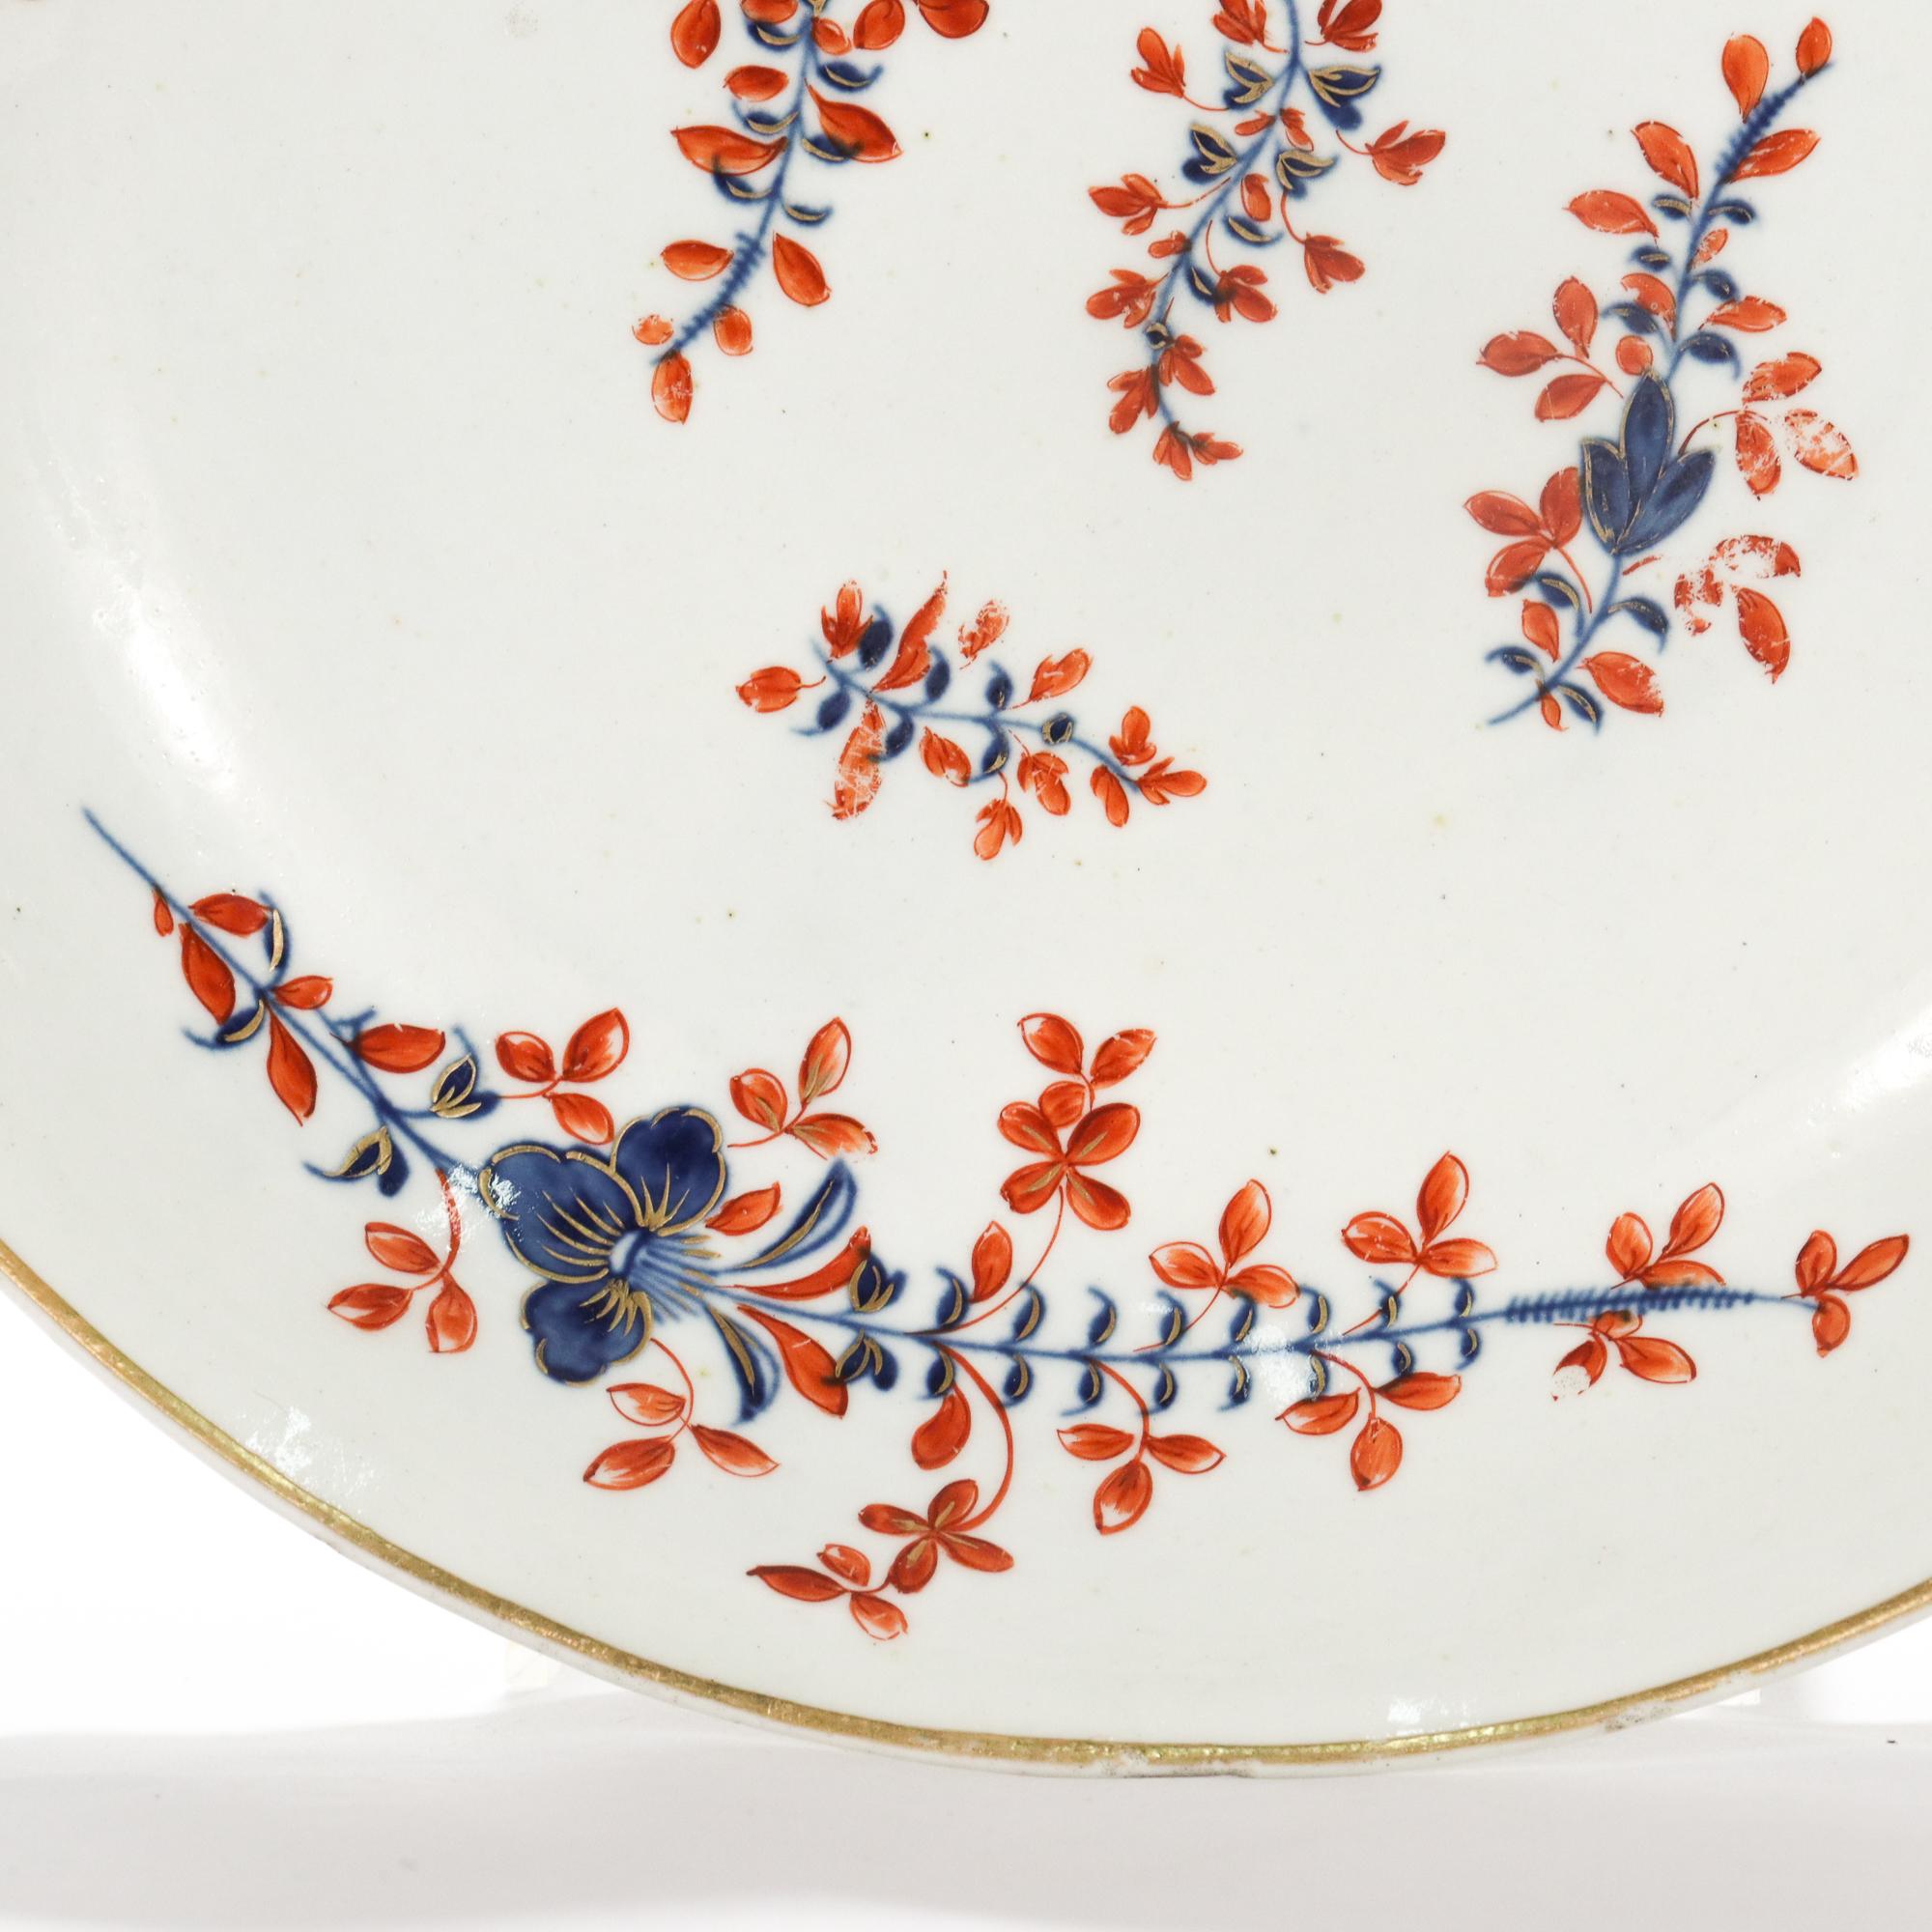 Antique 18th C Chantilly French Porcelain Bowl in a Clobbered Blue Sprig Pattern In Good Condition For Sale In Philadelphia, PA